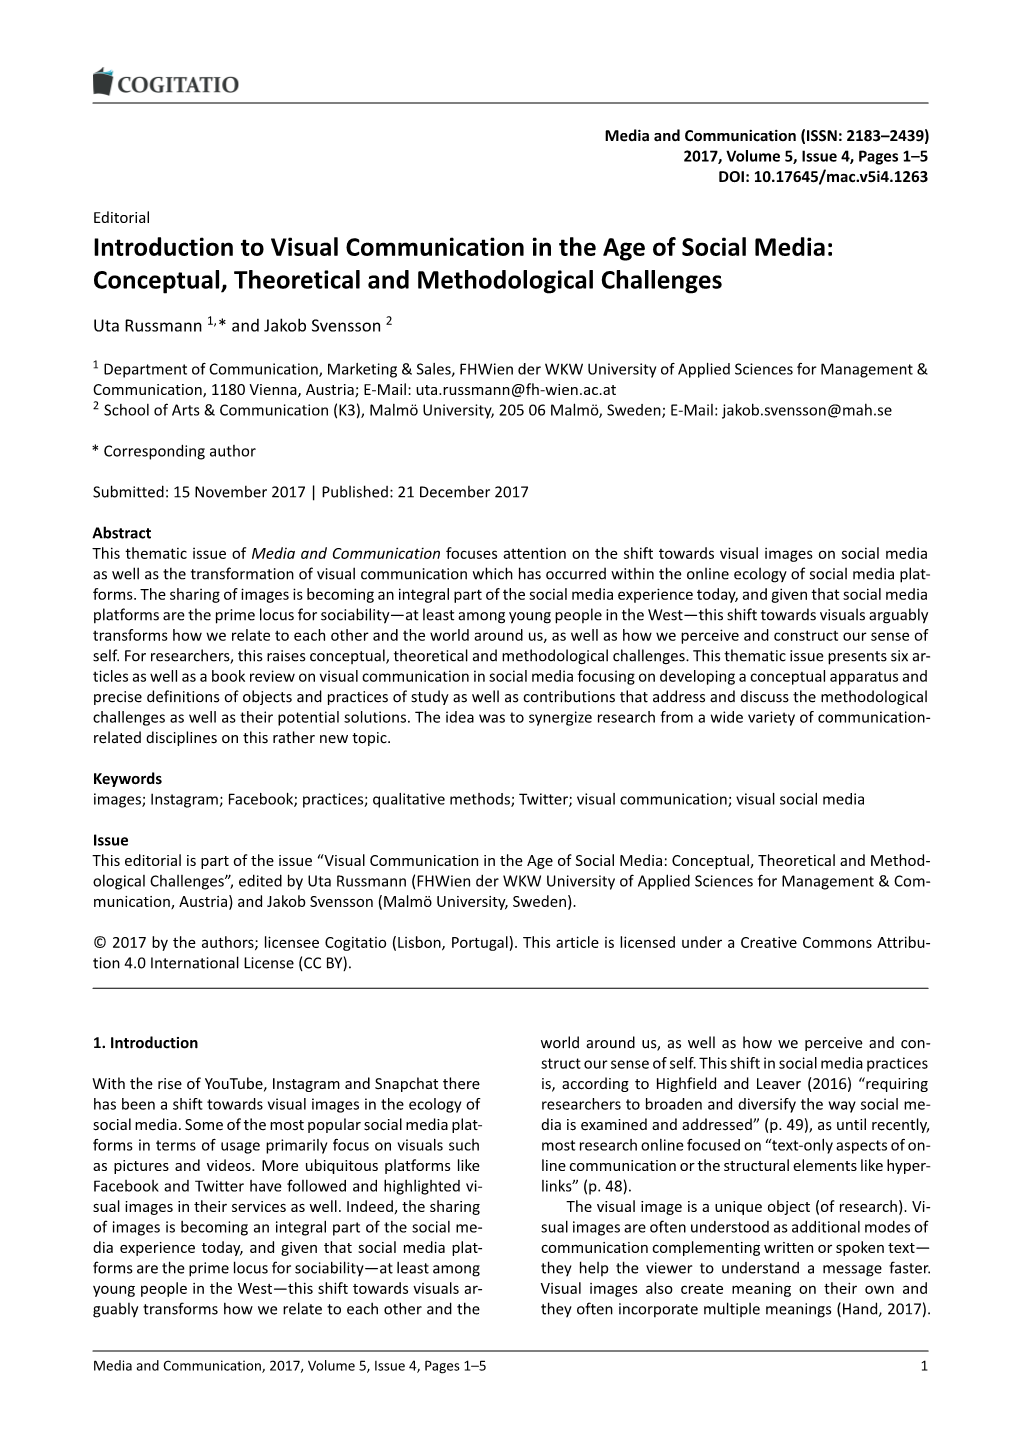 Introduction to Visual Communication in the Age of Social Media: Conceptual, Theoretical and Methodological Challenges